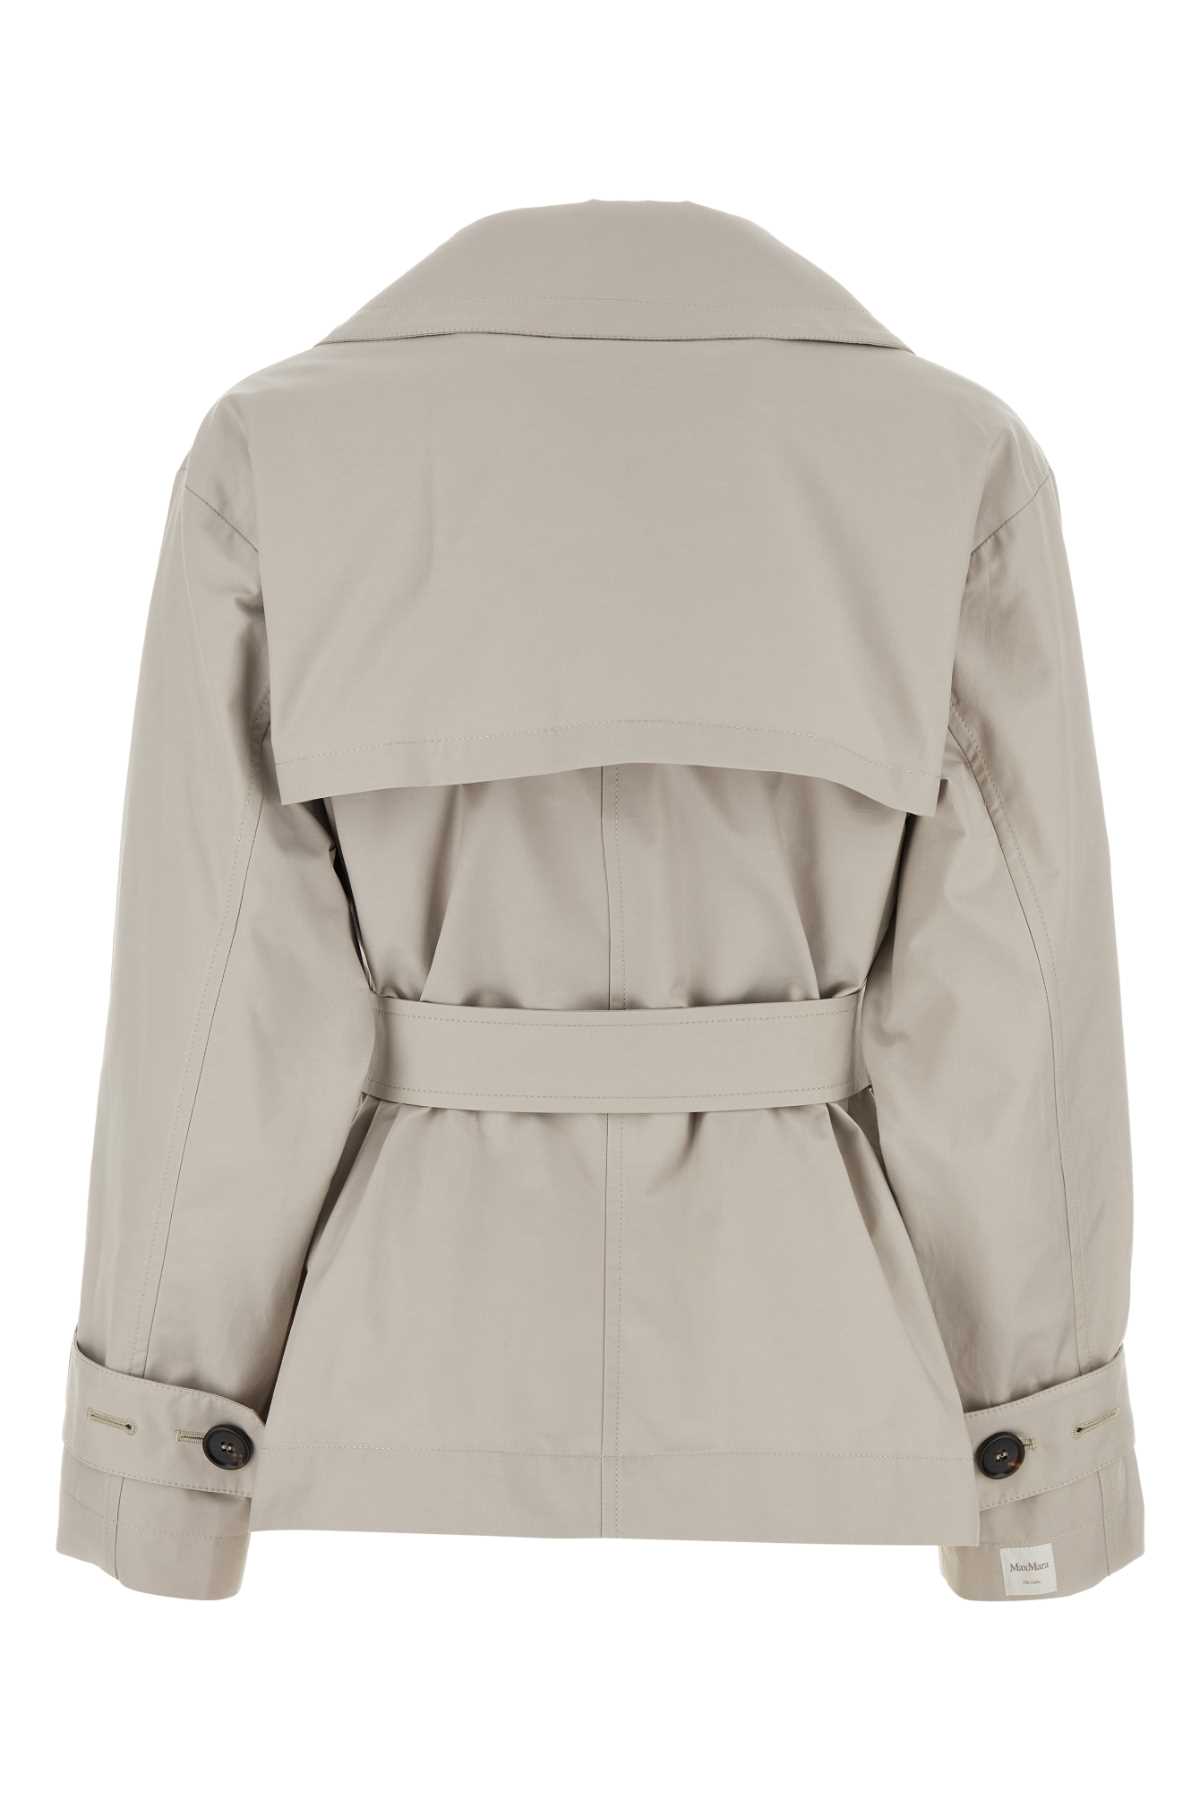 Max Mara The Cube Sand Twill Jtrench Trench Coat In Ecru